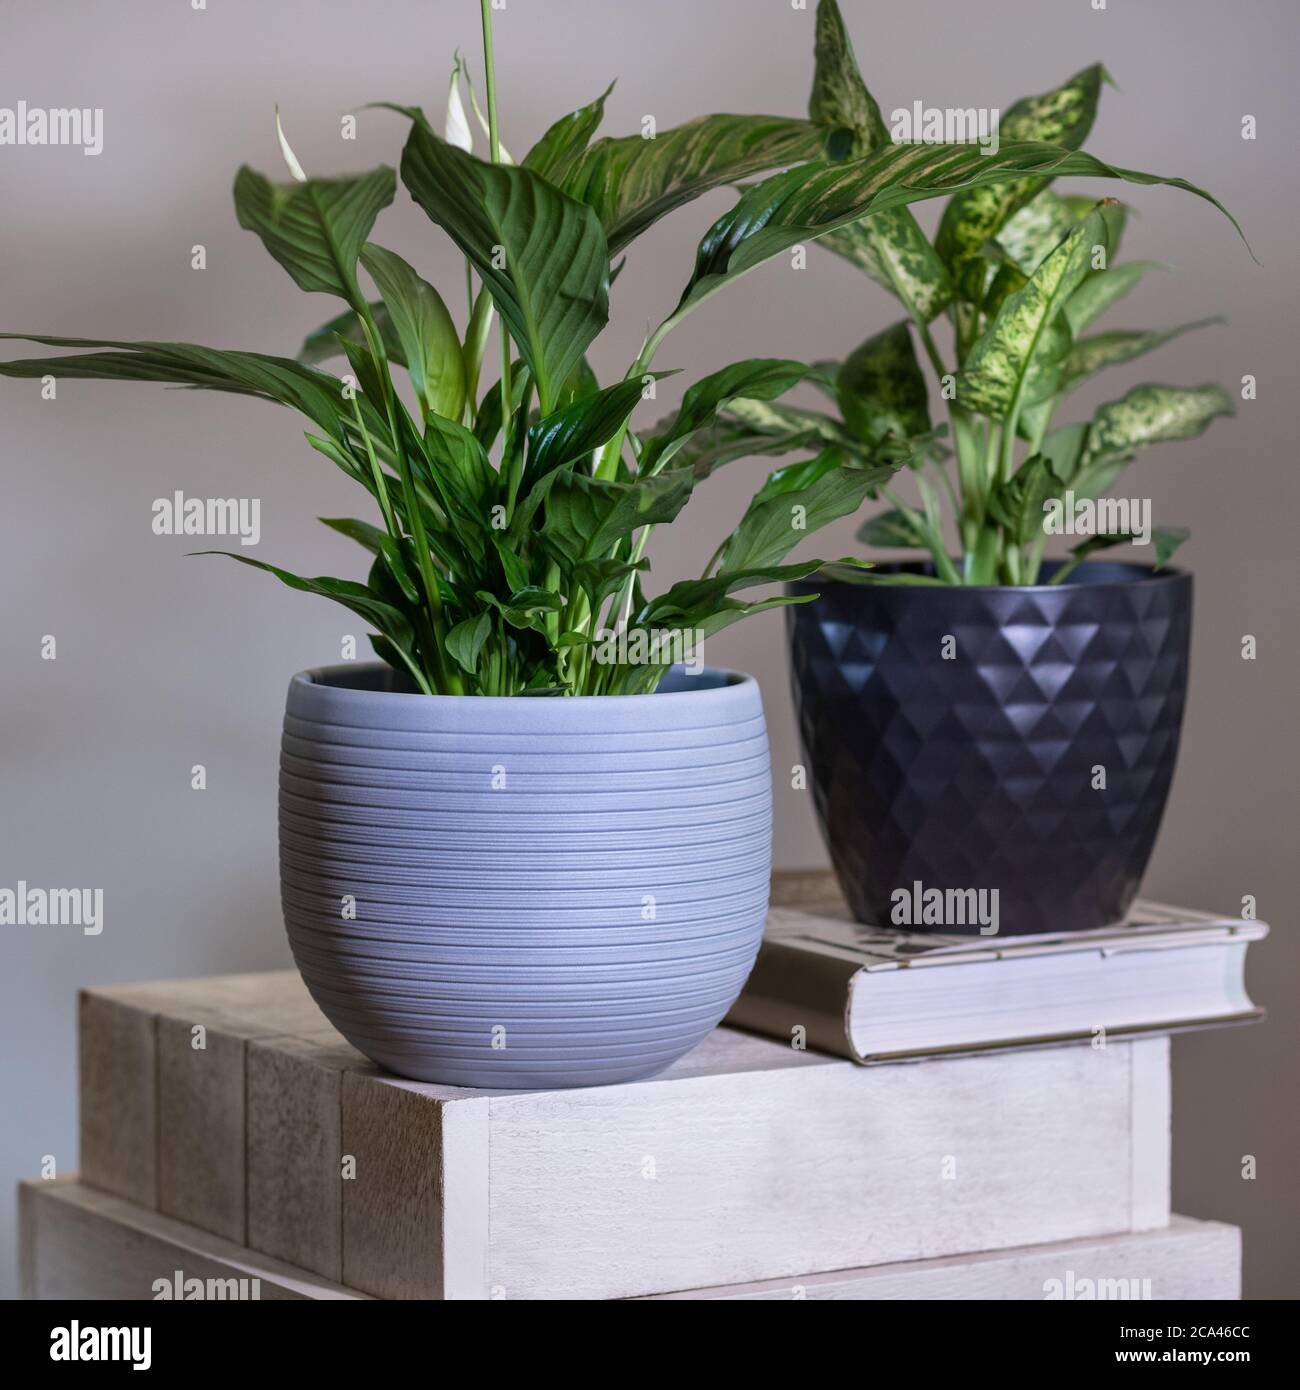 Dieffenbachia Dumb canes with Peace Lily, Spathiphyllum plant Stock Photo